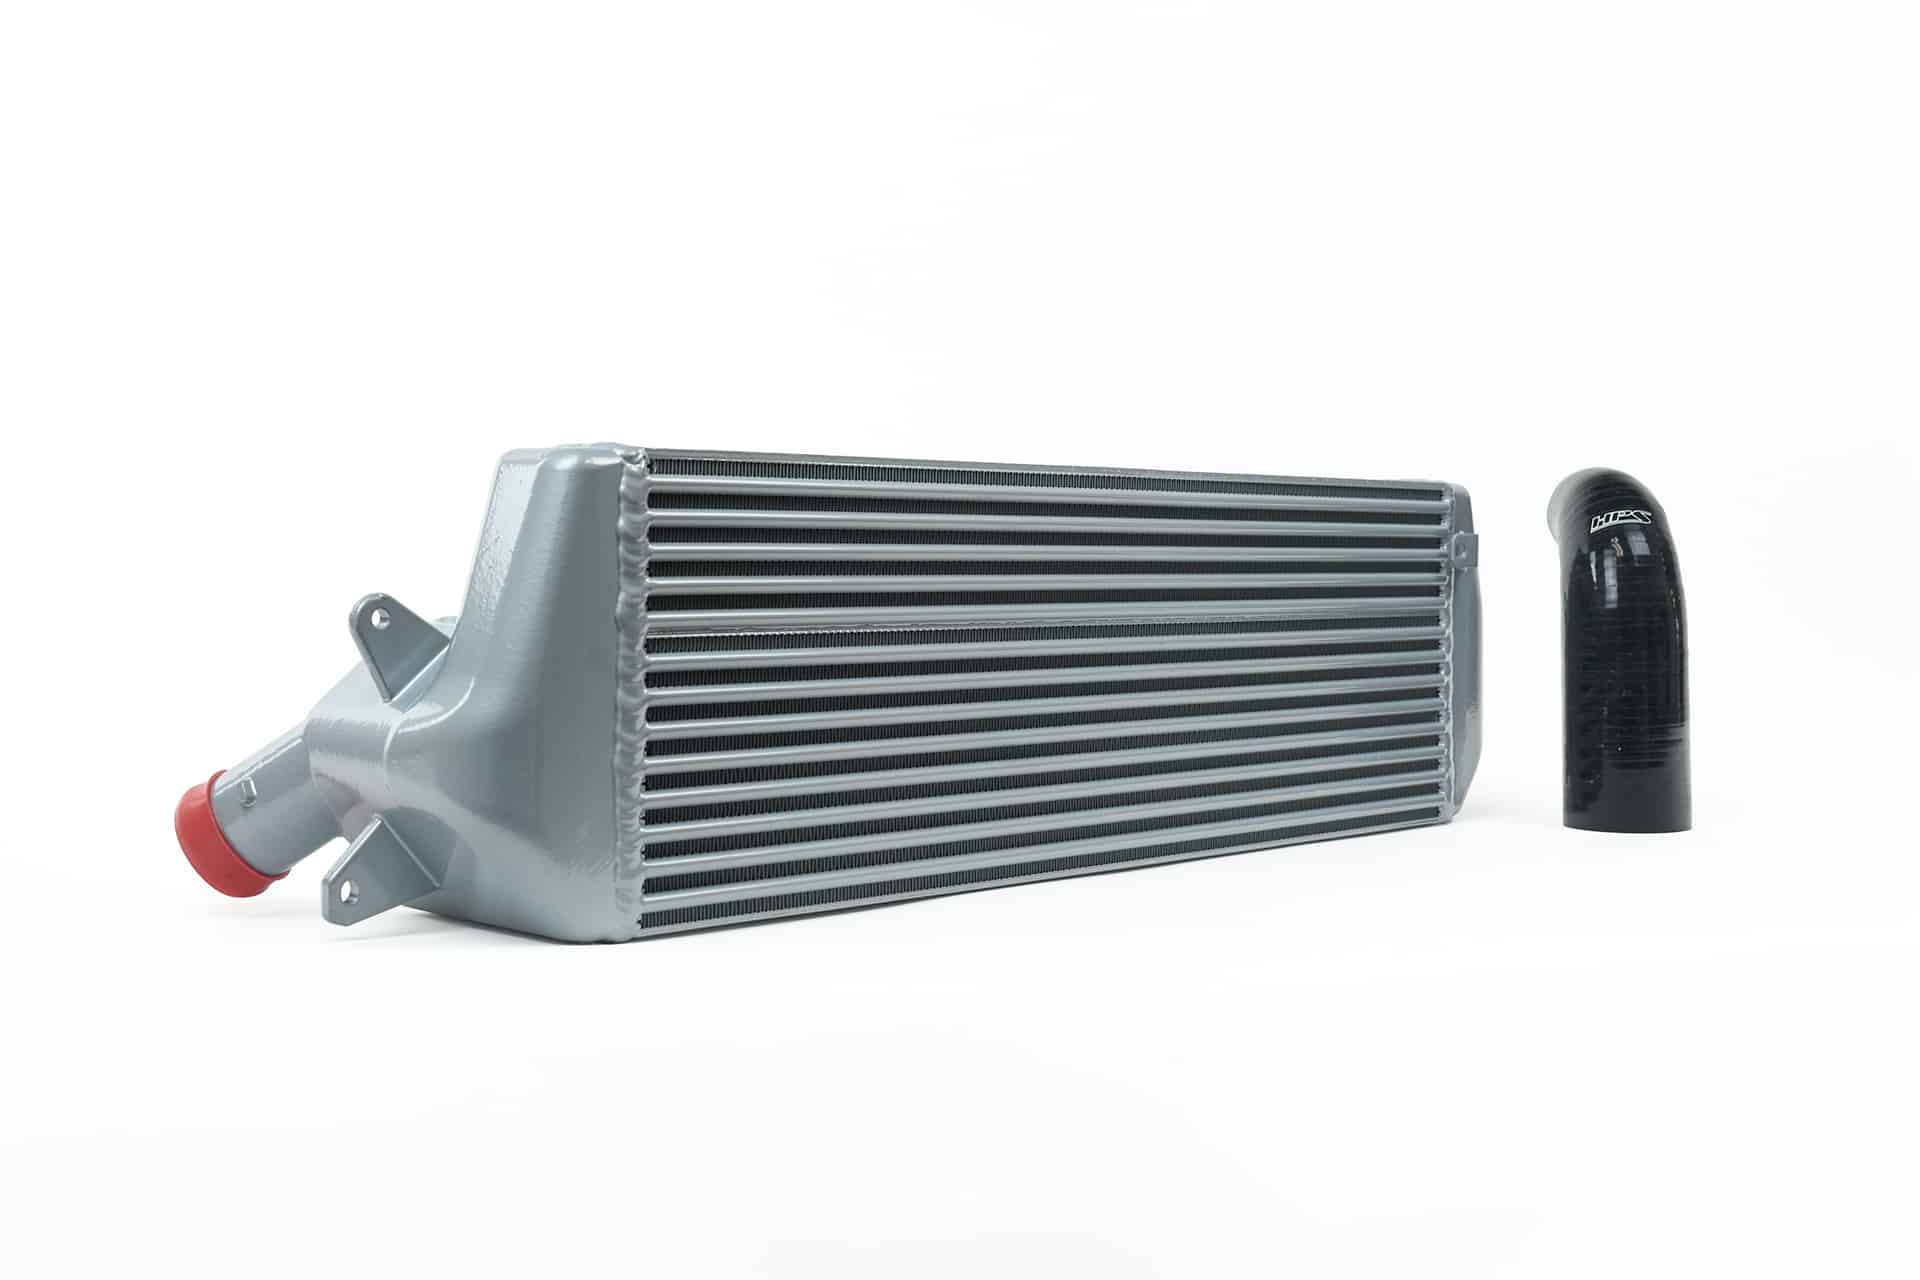 DCT Veloster N / i30 N Stepped core intercooler